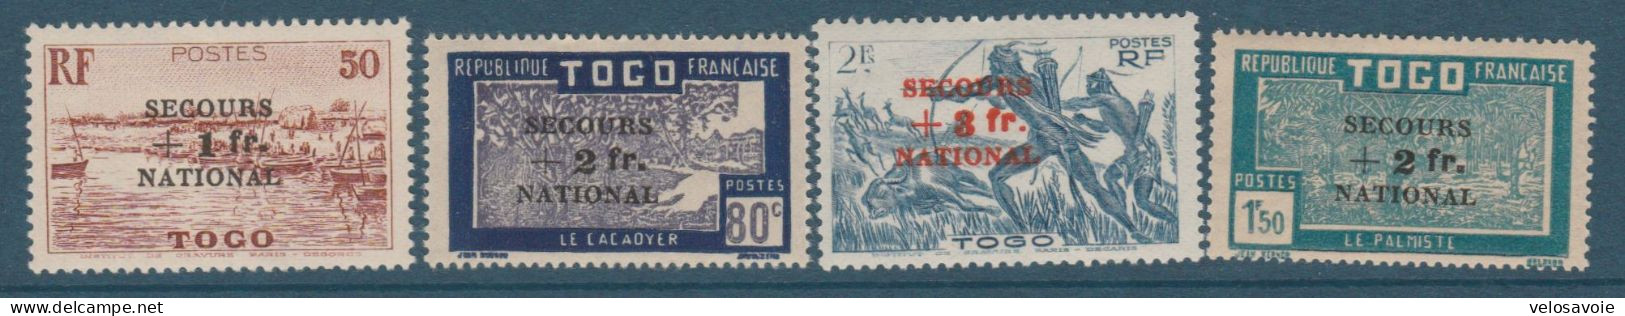 TOGO N° 211/214 SECOURS NATIONAL * - Nuovi